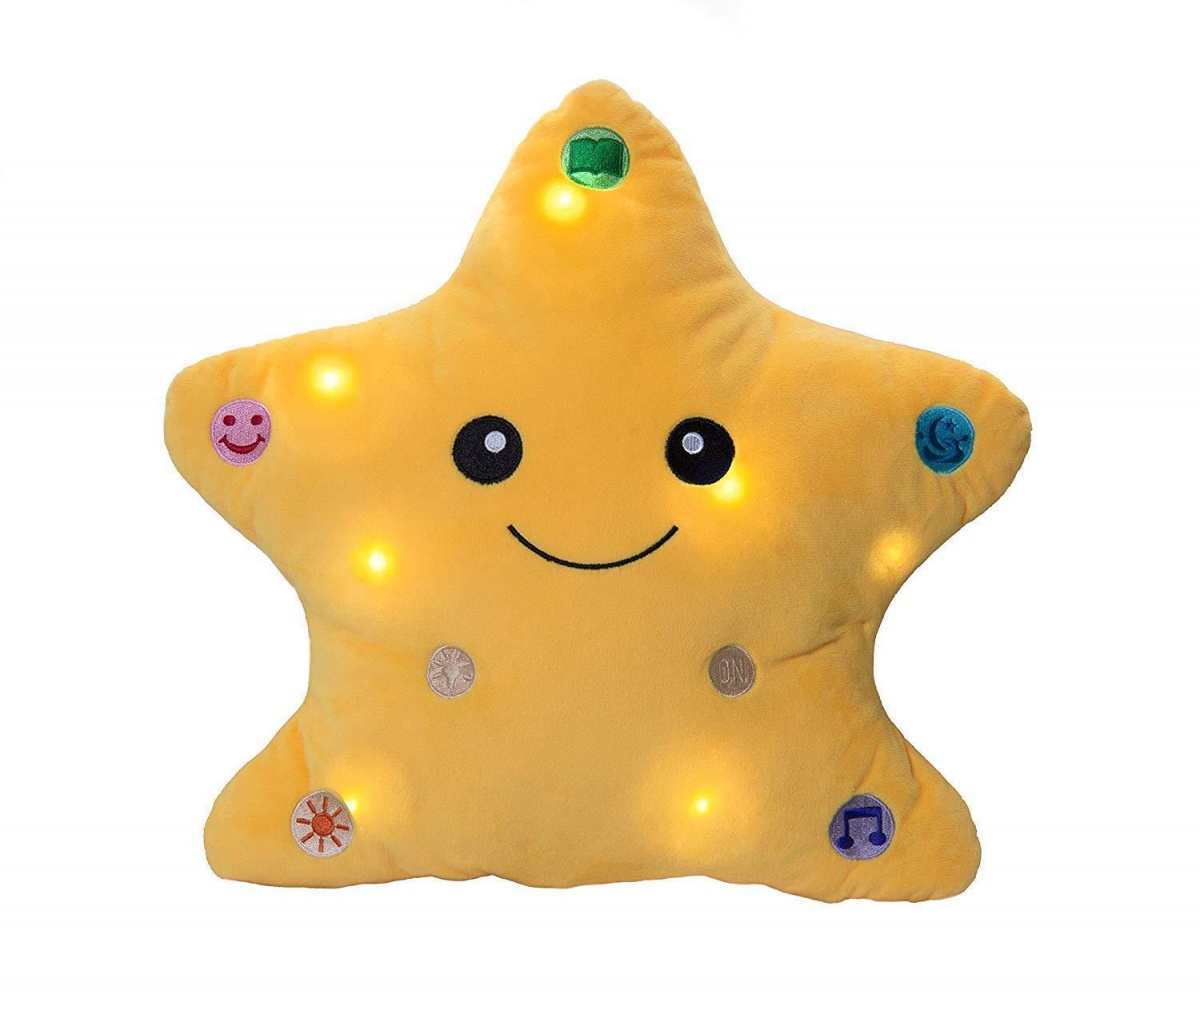 Light-up pillow 10 Fun Nightlights for Your Child's Room